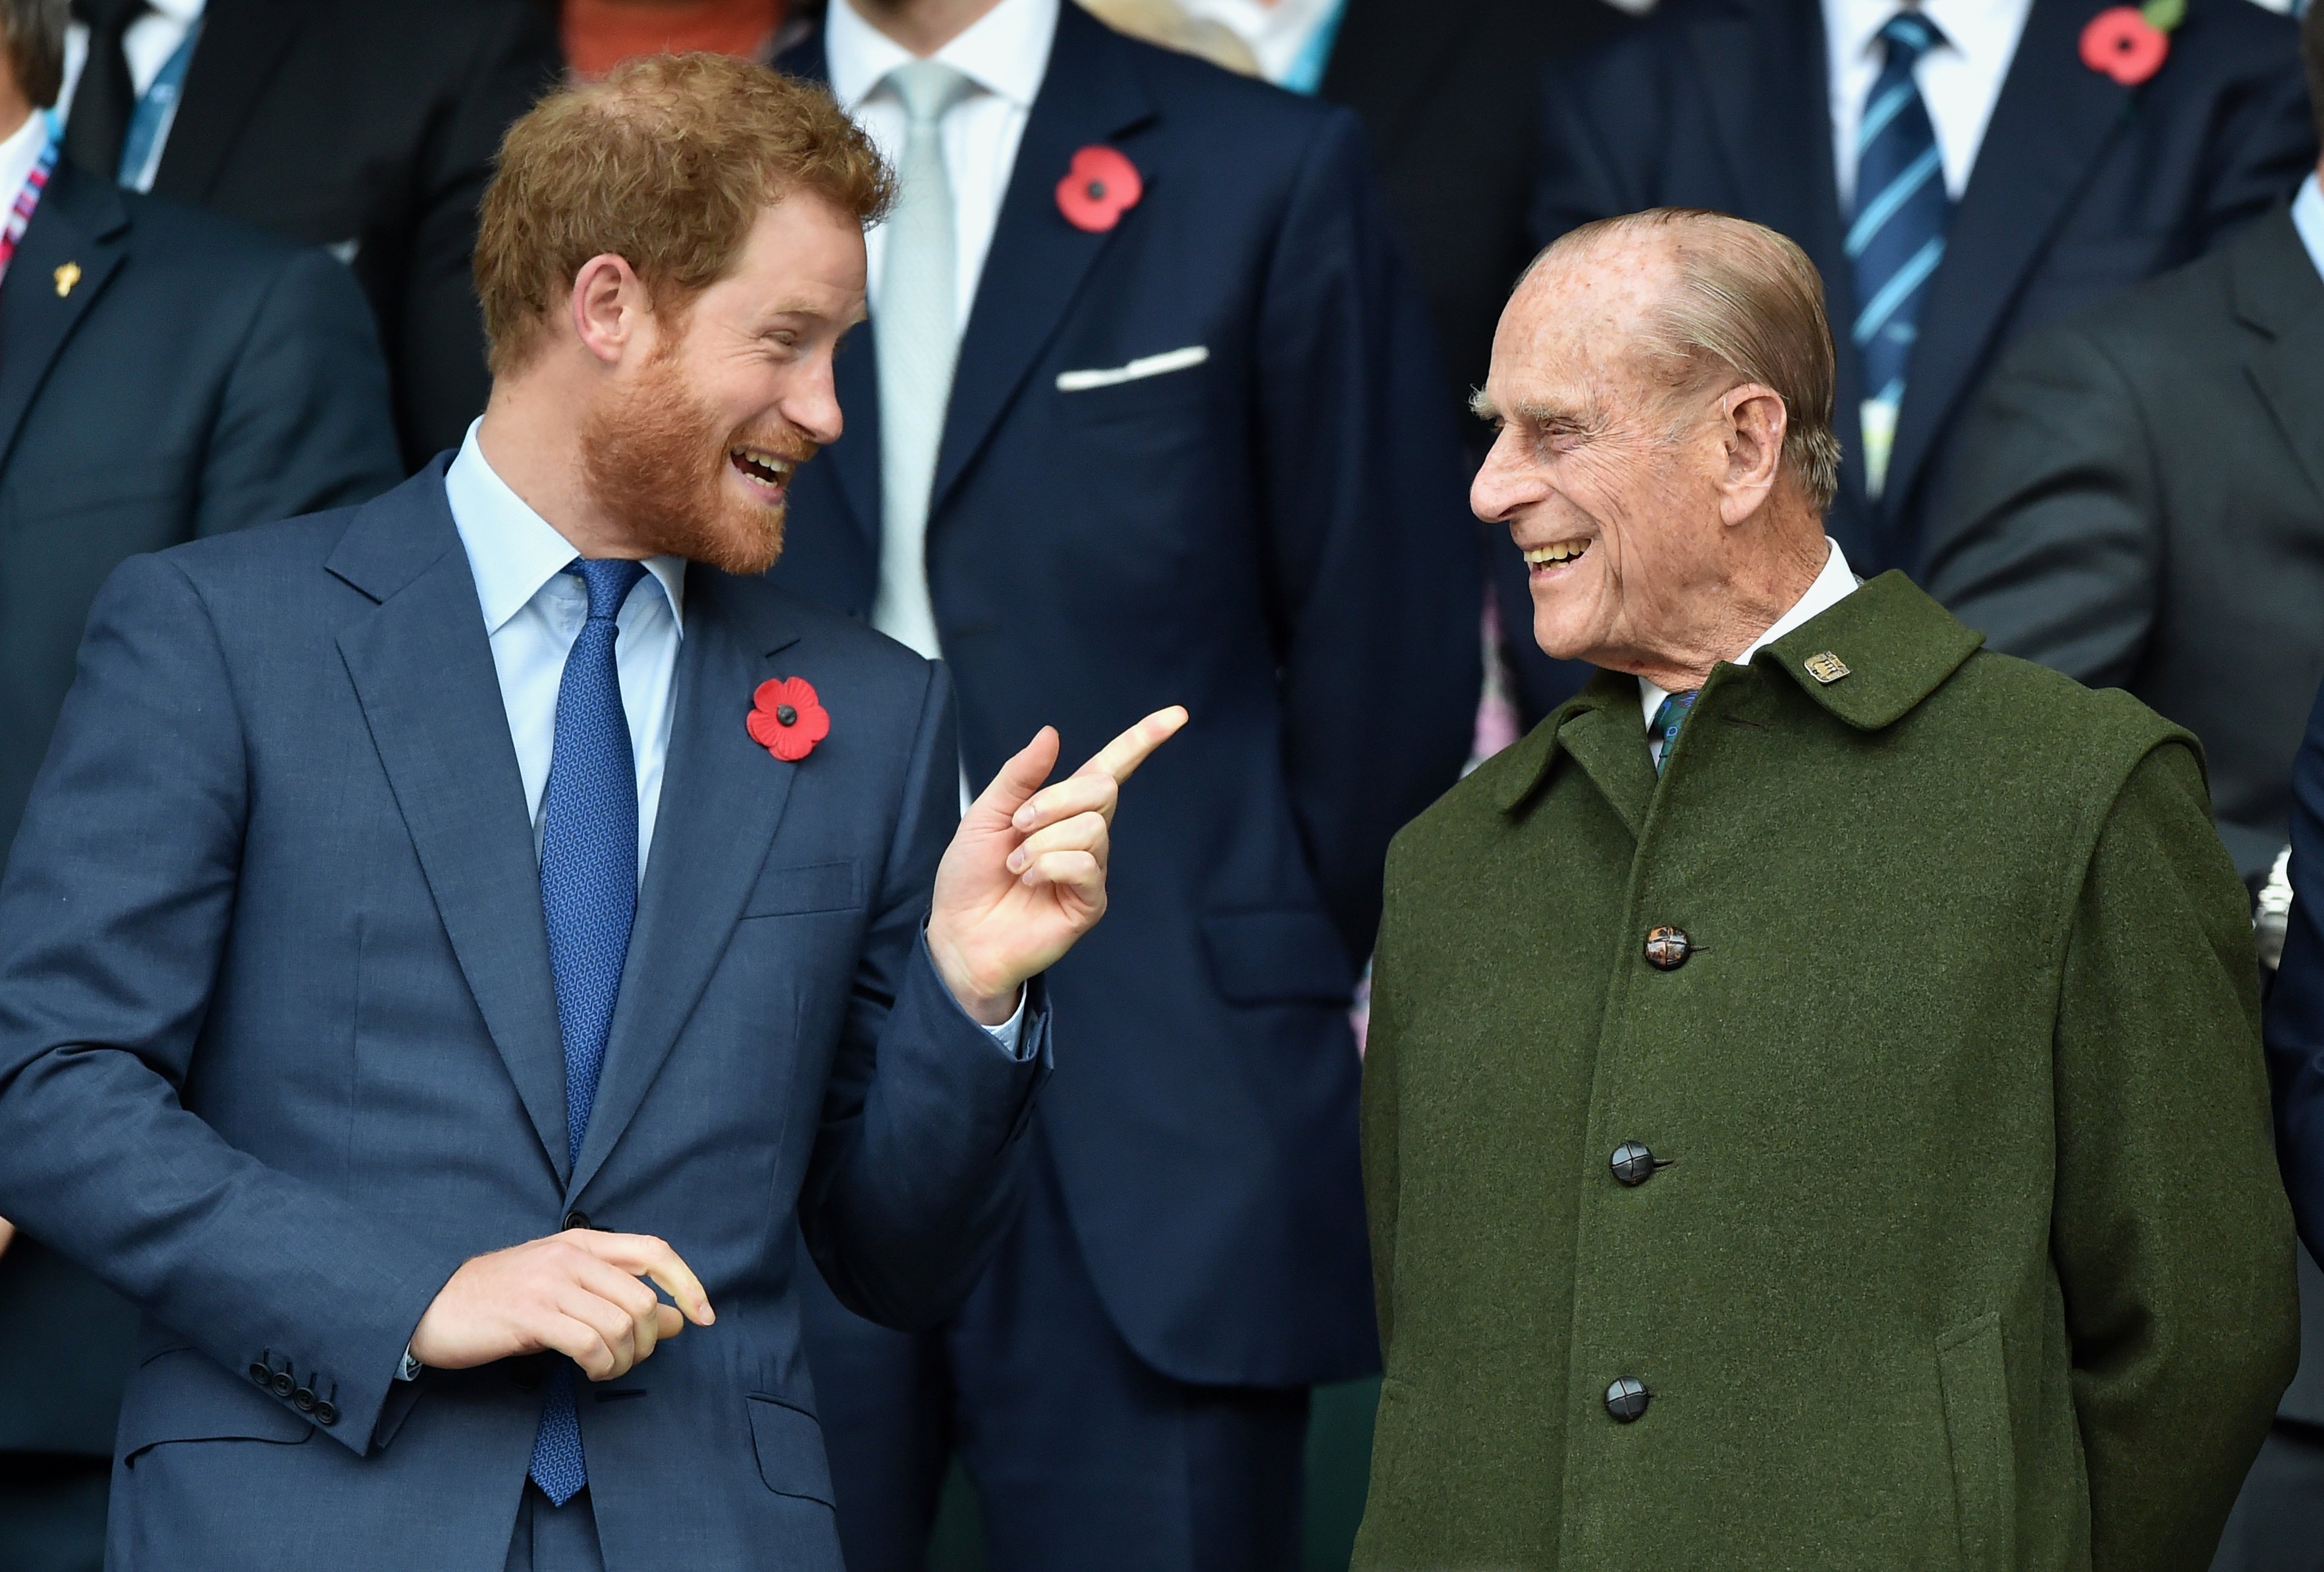 A captured moment between Prince Harry and his grandfather Prince Philip | Photo: Getty Images